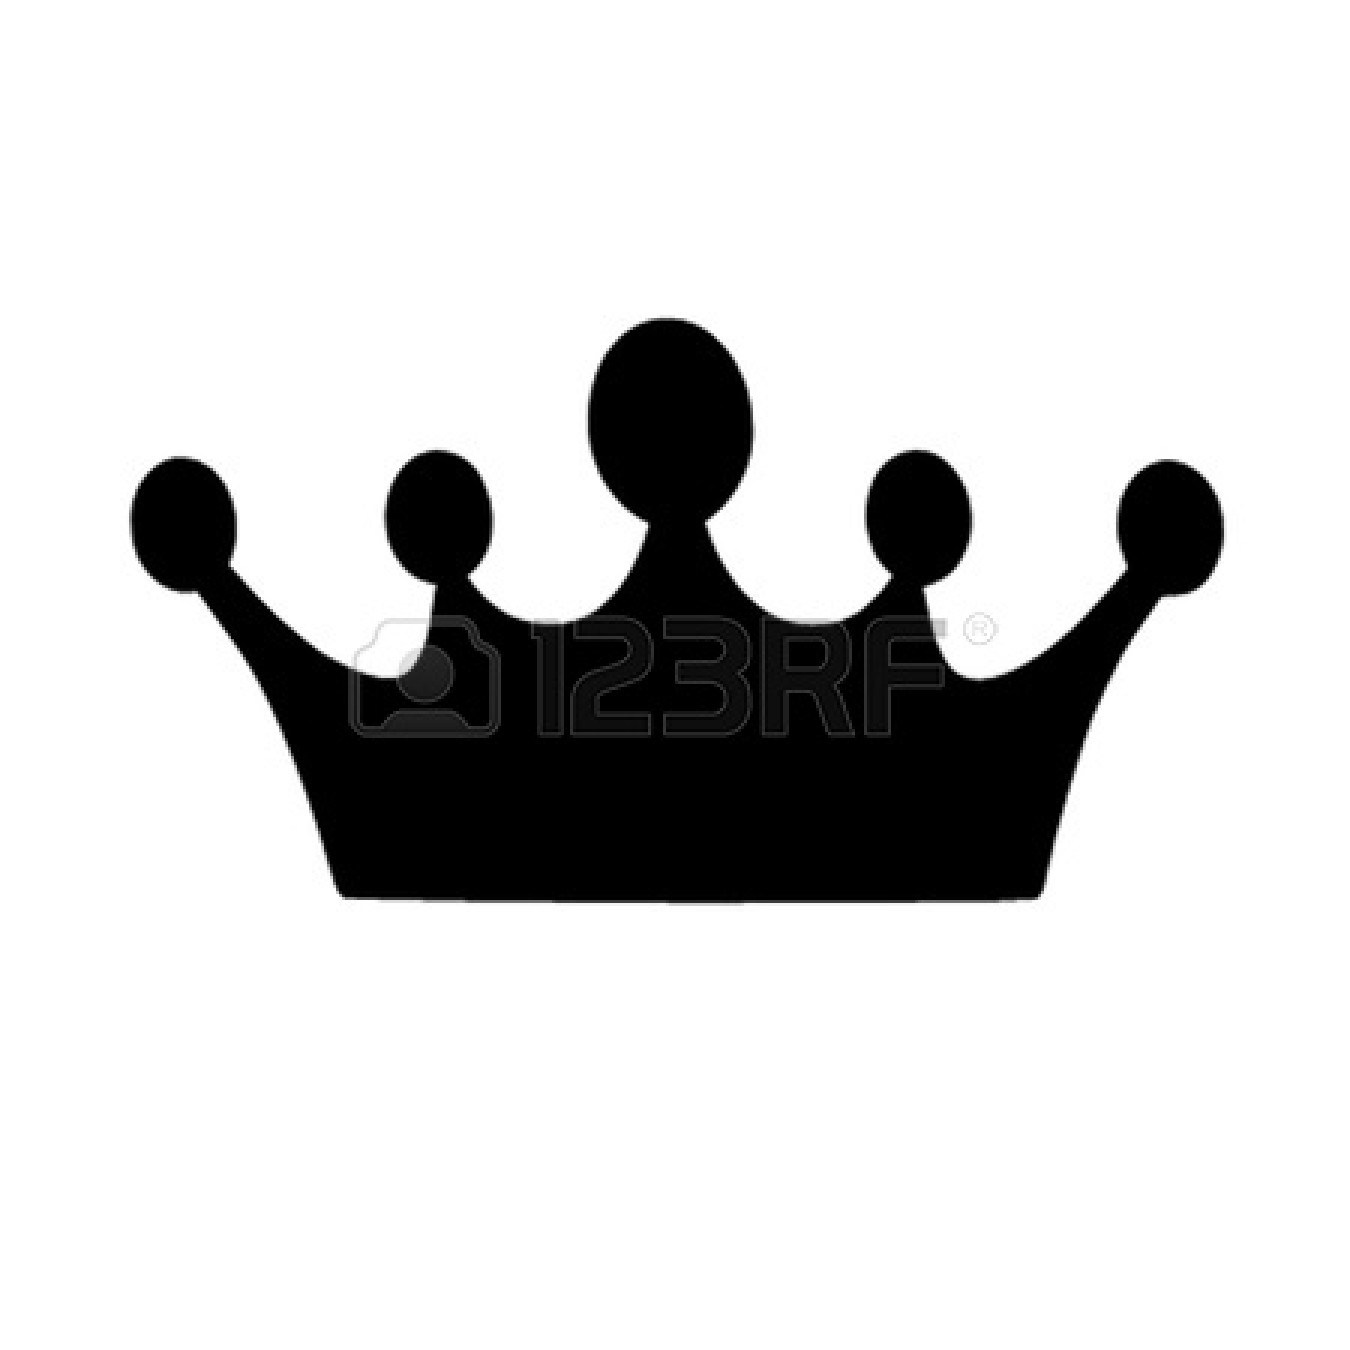 Crown clipart black and white Fresh Crown black and white crown.